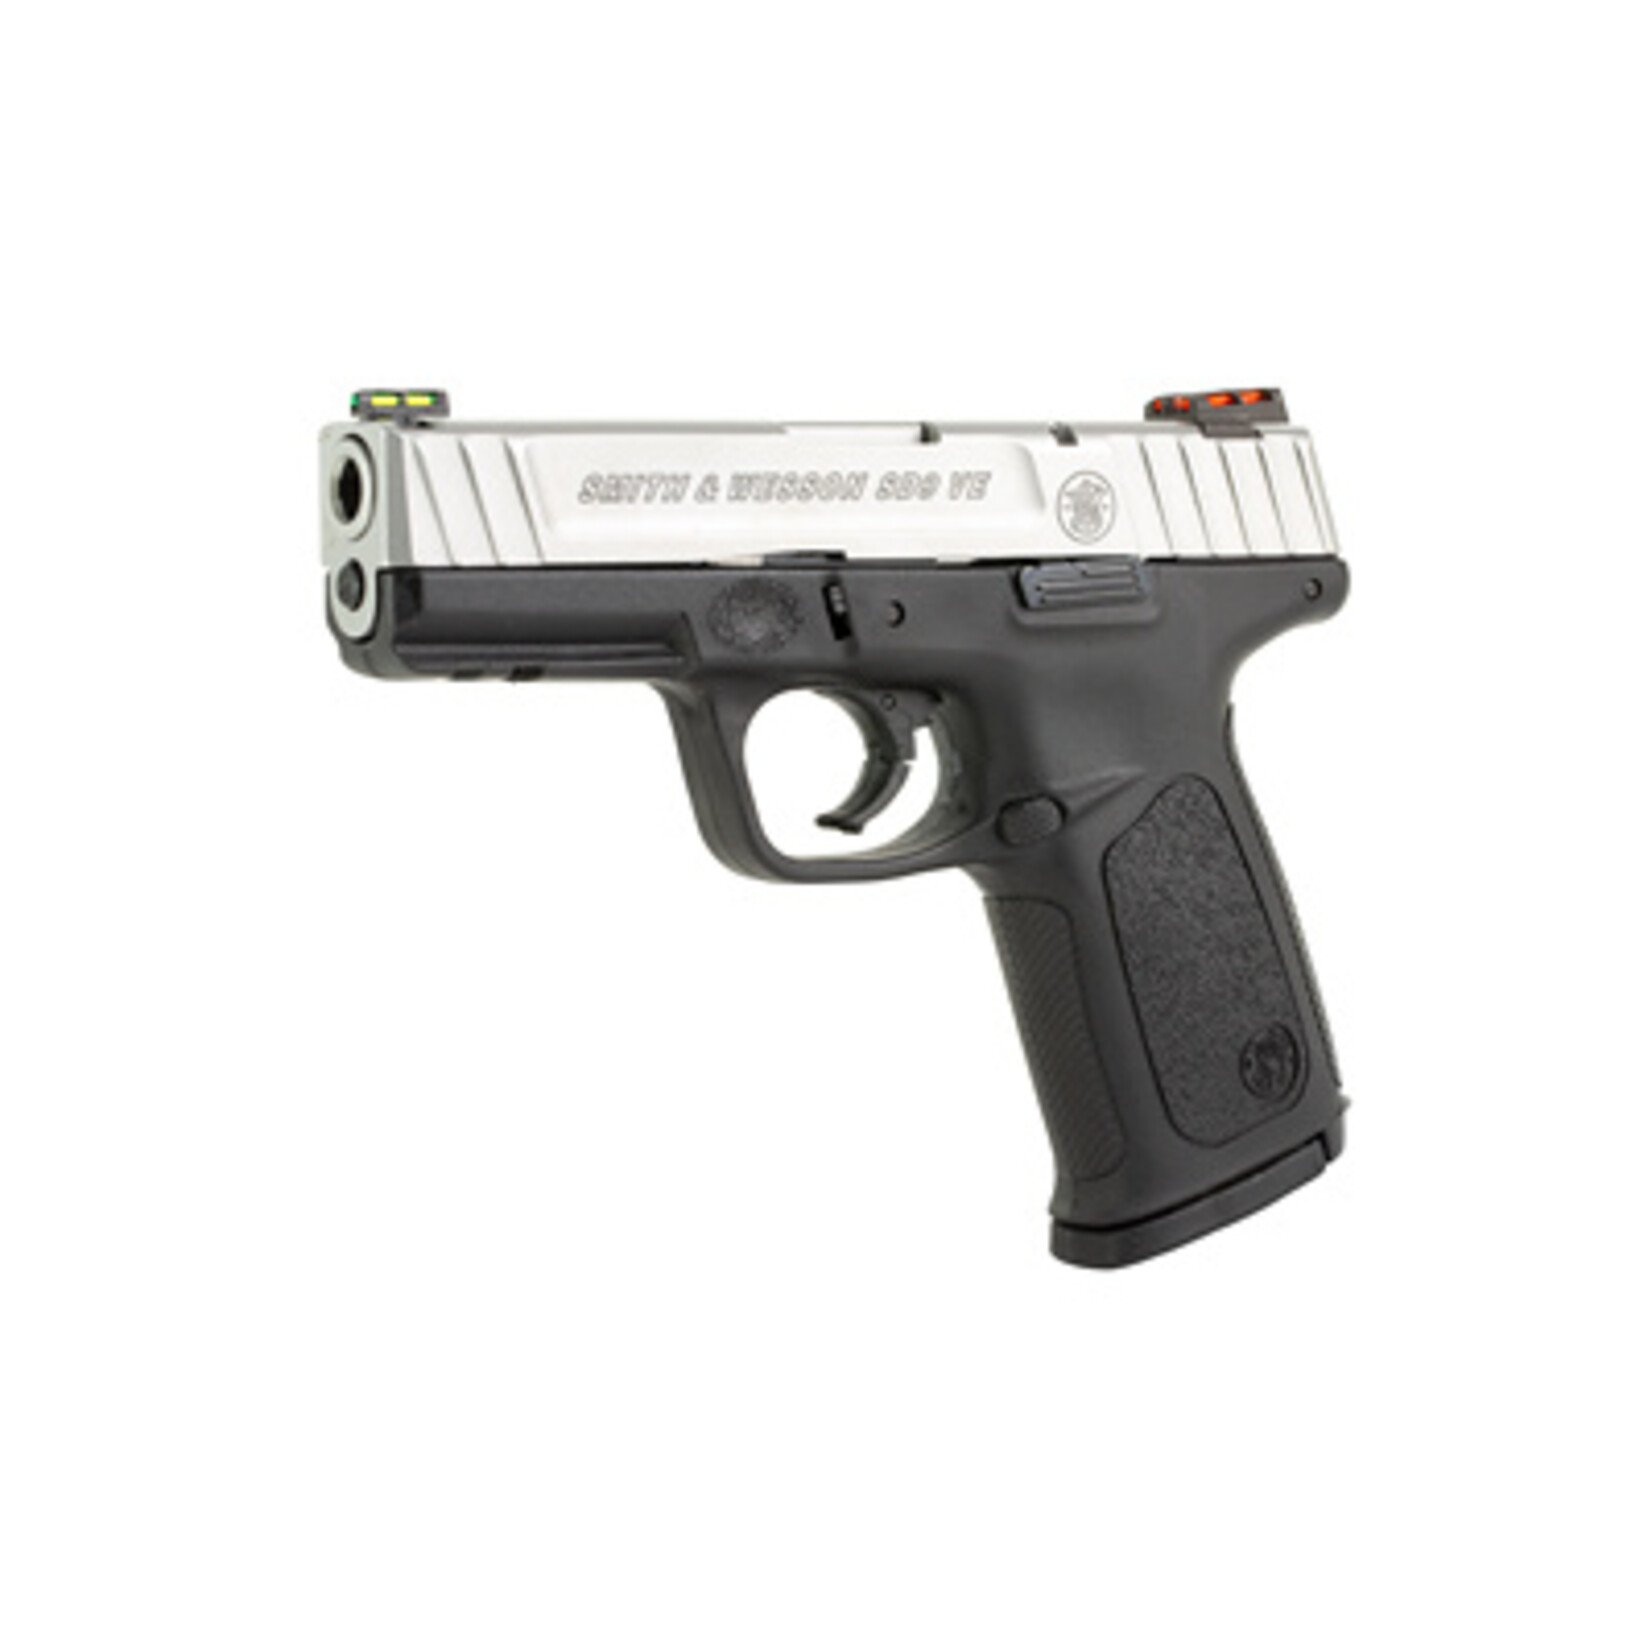 SMITH & WESSON S&W, SD9 VE LIGHT,9MM,4.0"BBL, 15+1